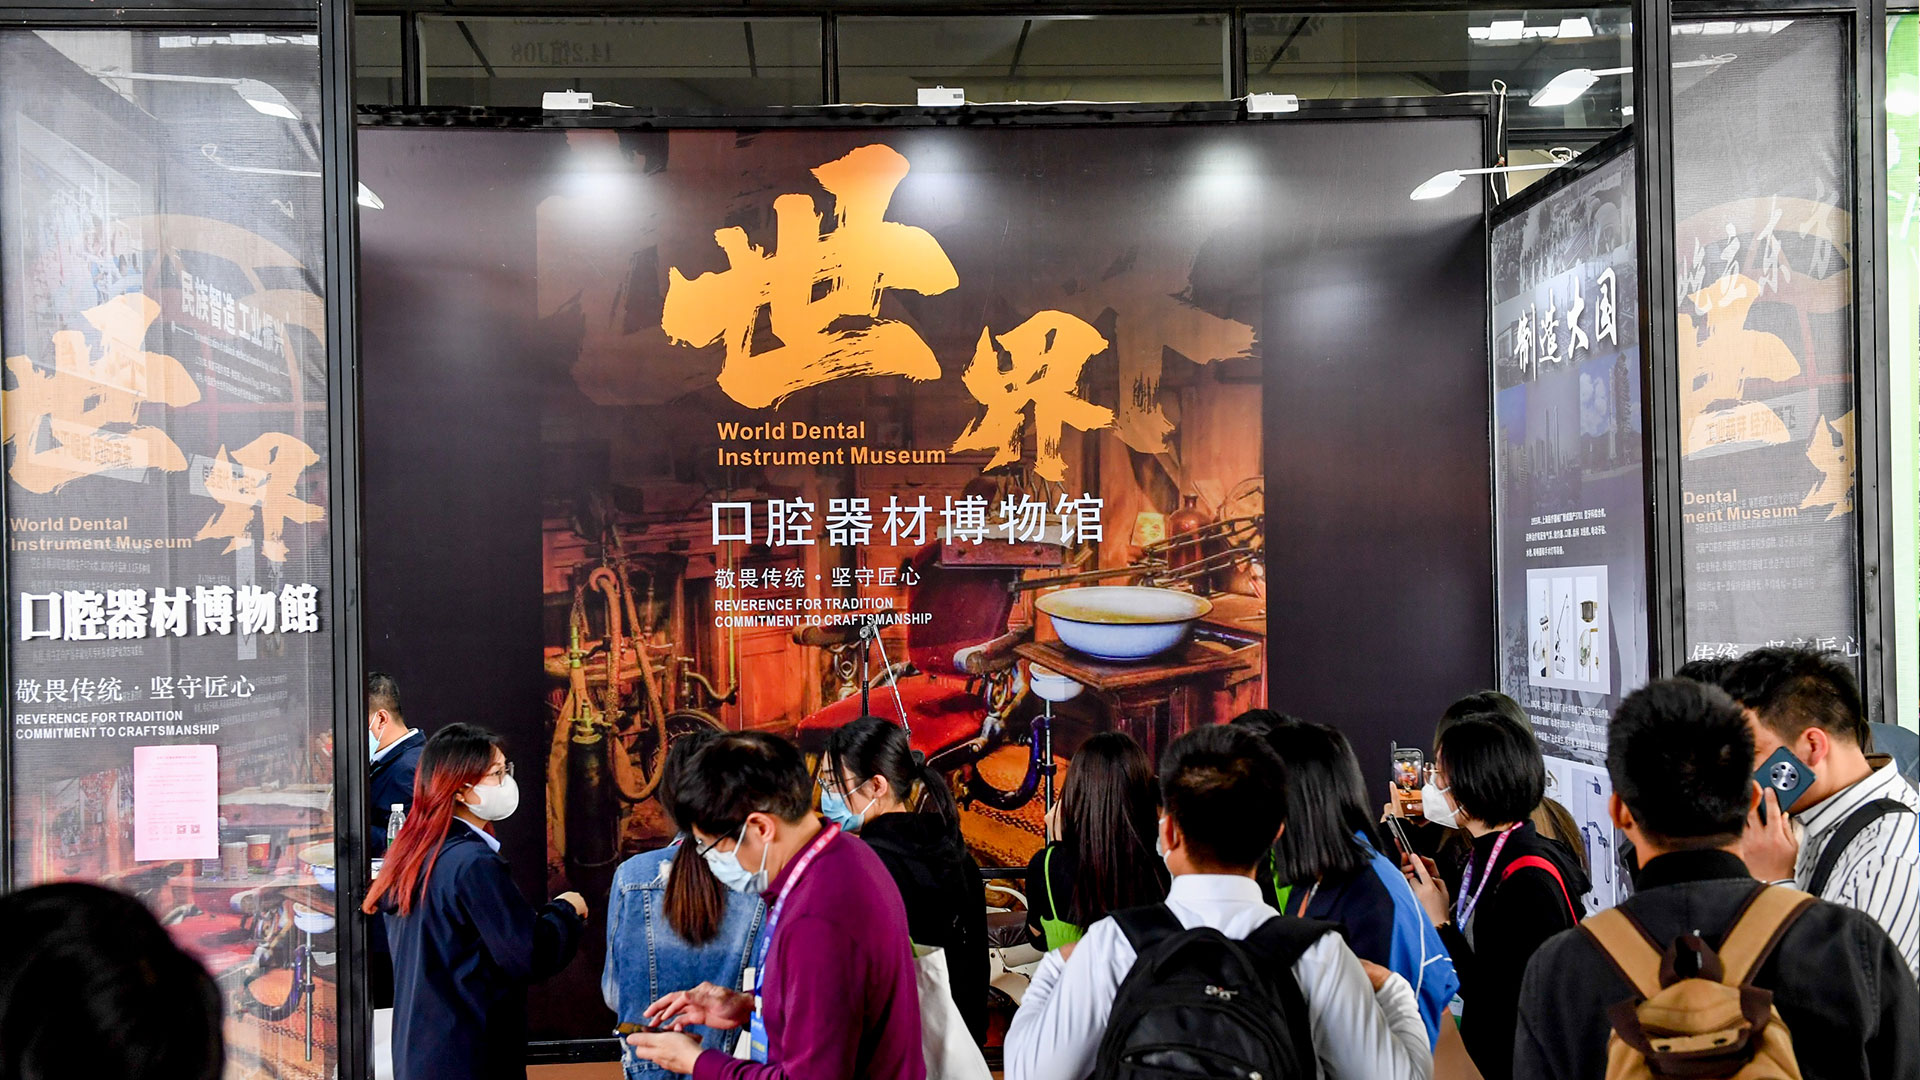 In addition to learning more about current dental science and knowledge, attendees can look forward to various social activities. (Image: Dental South China)